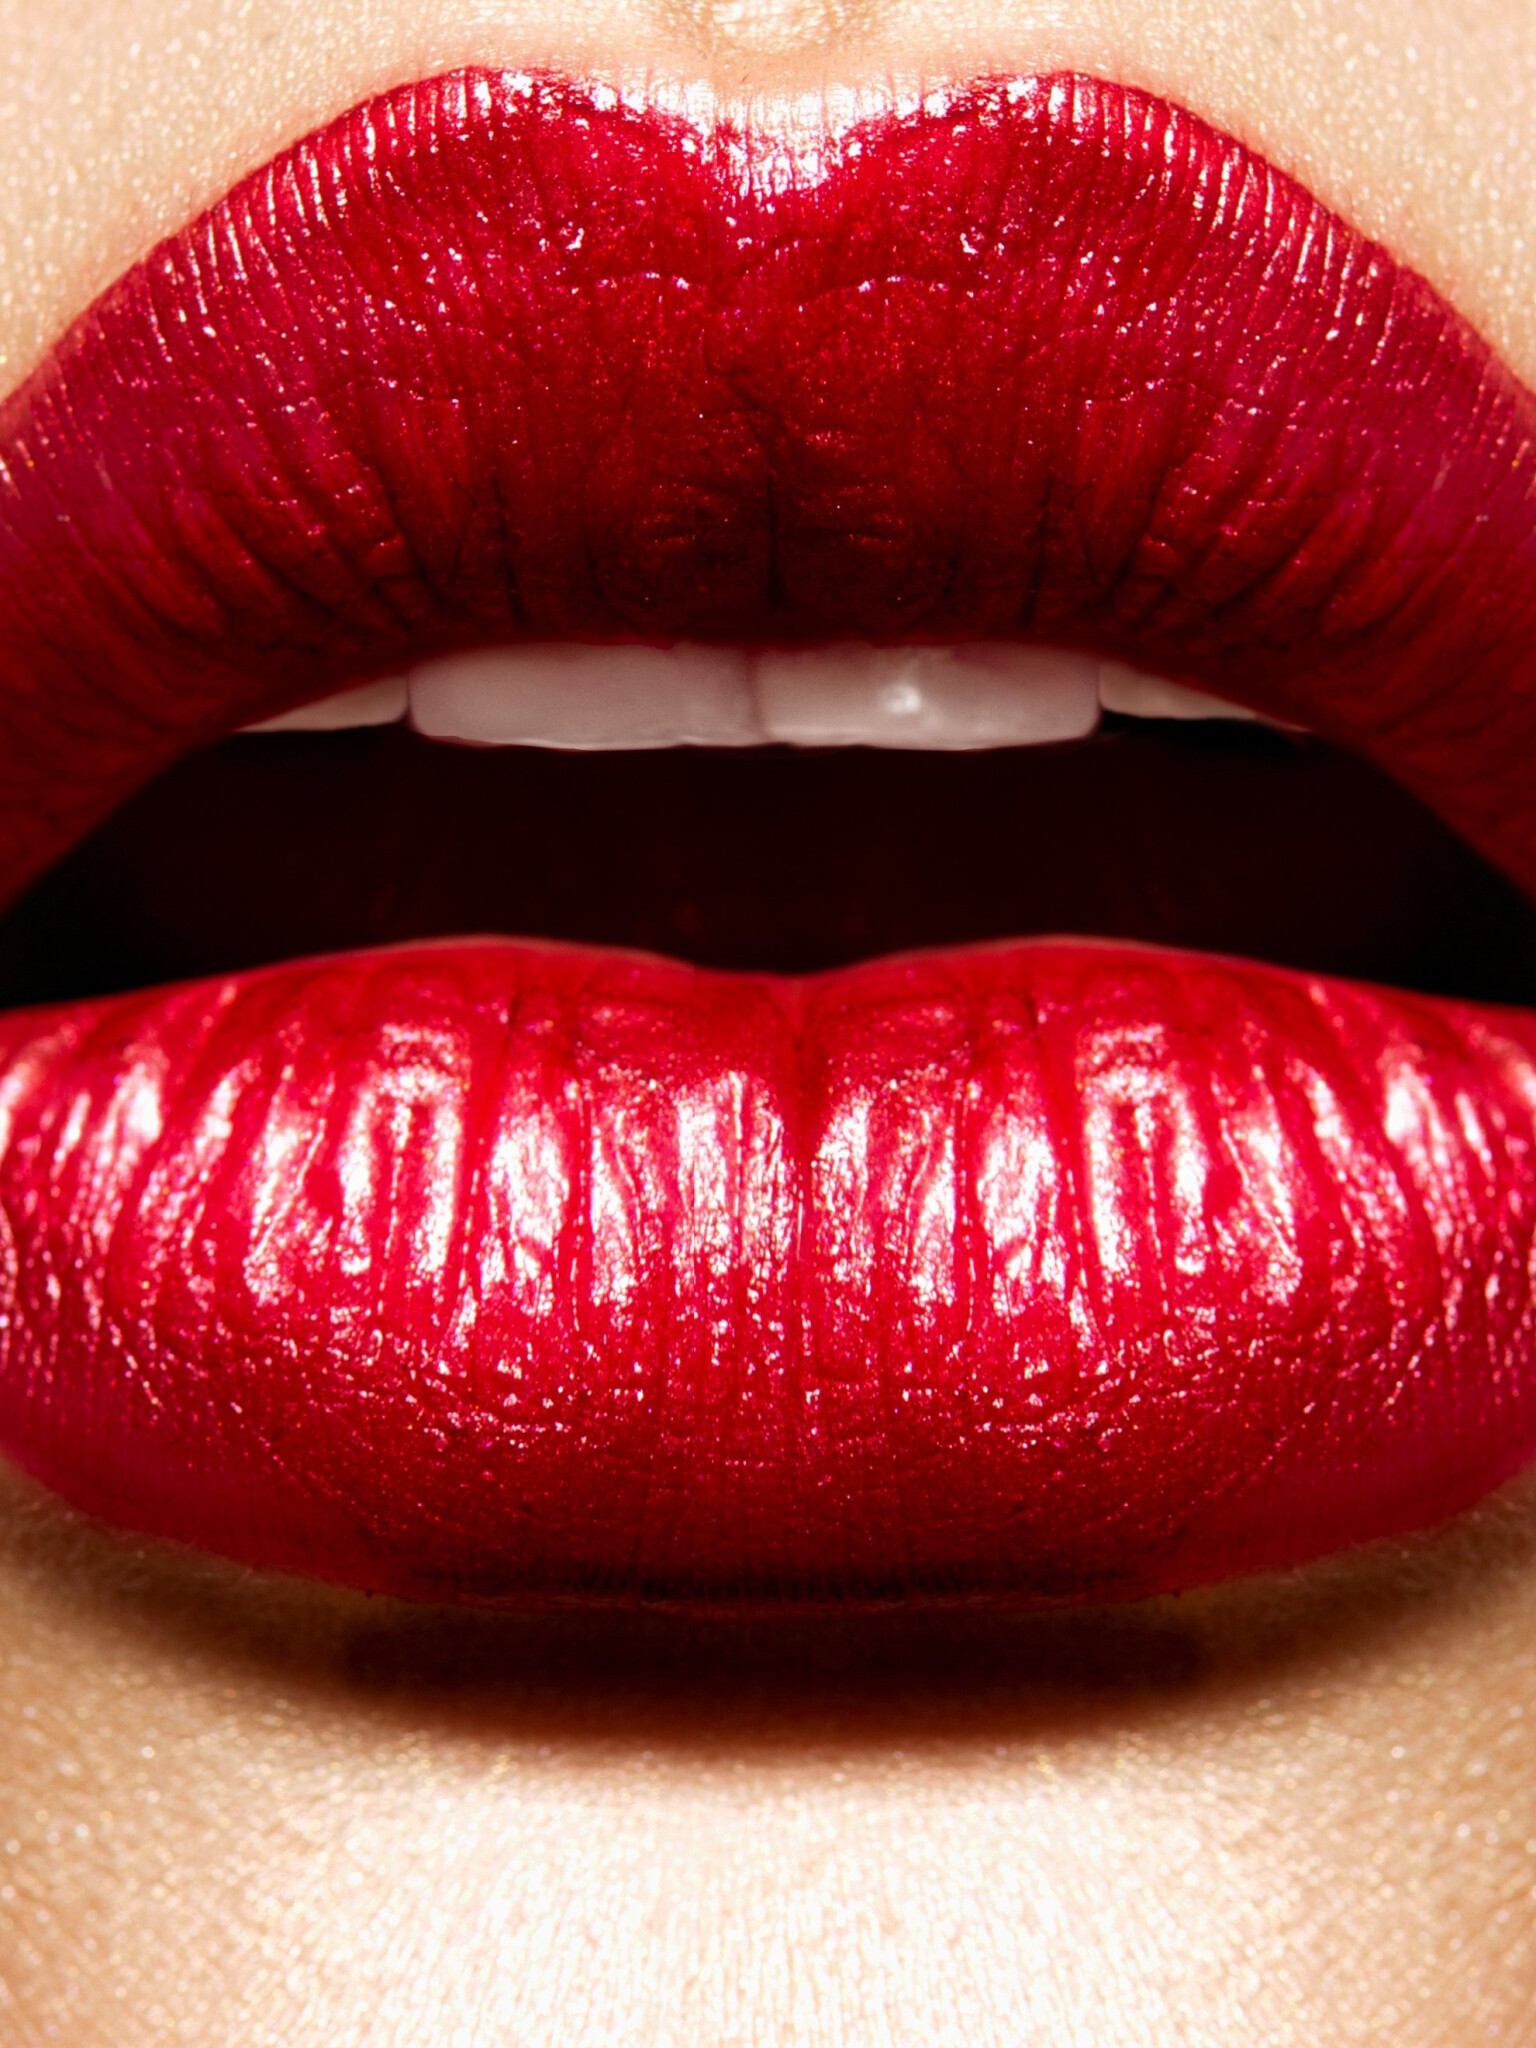 Lipstick: Red lips contouring, A lip shape where the upper lip comes to two distinct points toward the center of the mouth. 1540x2050 HD Wallpaper.